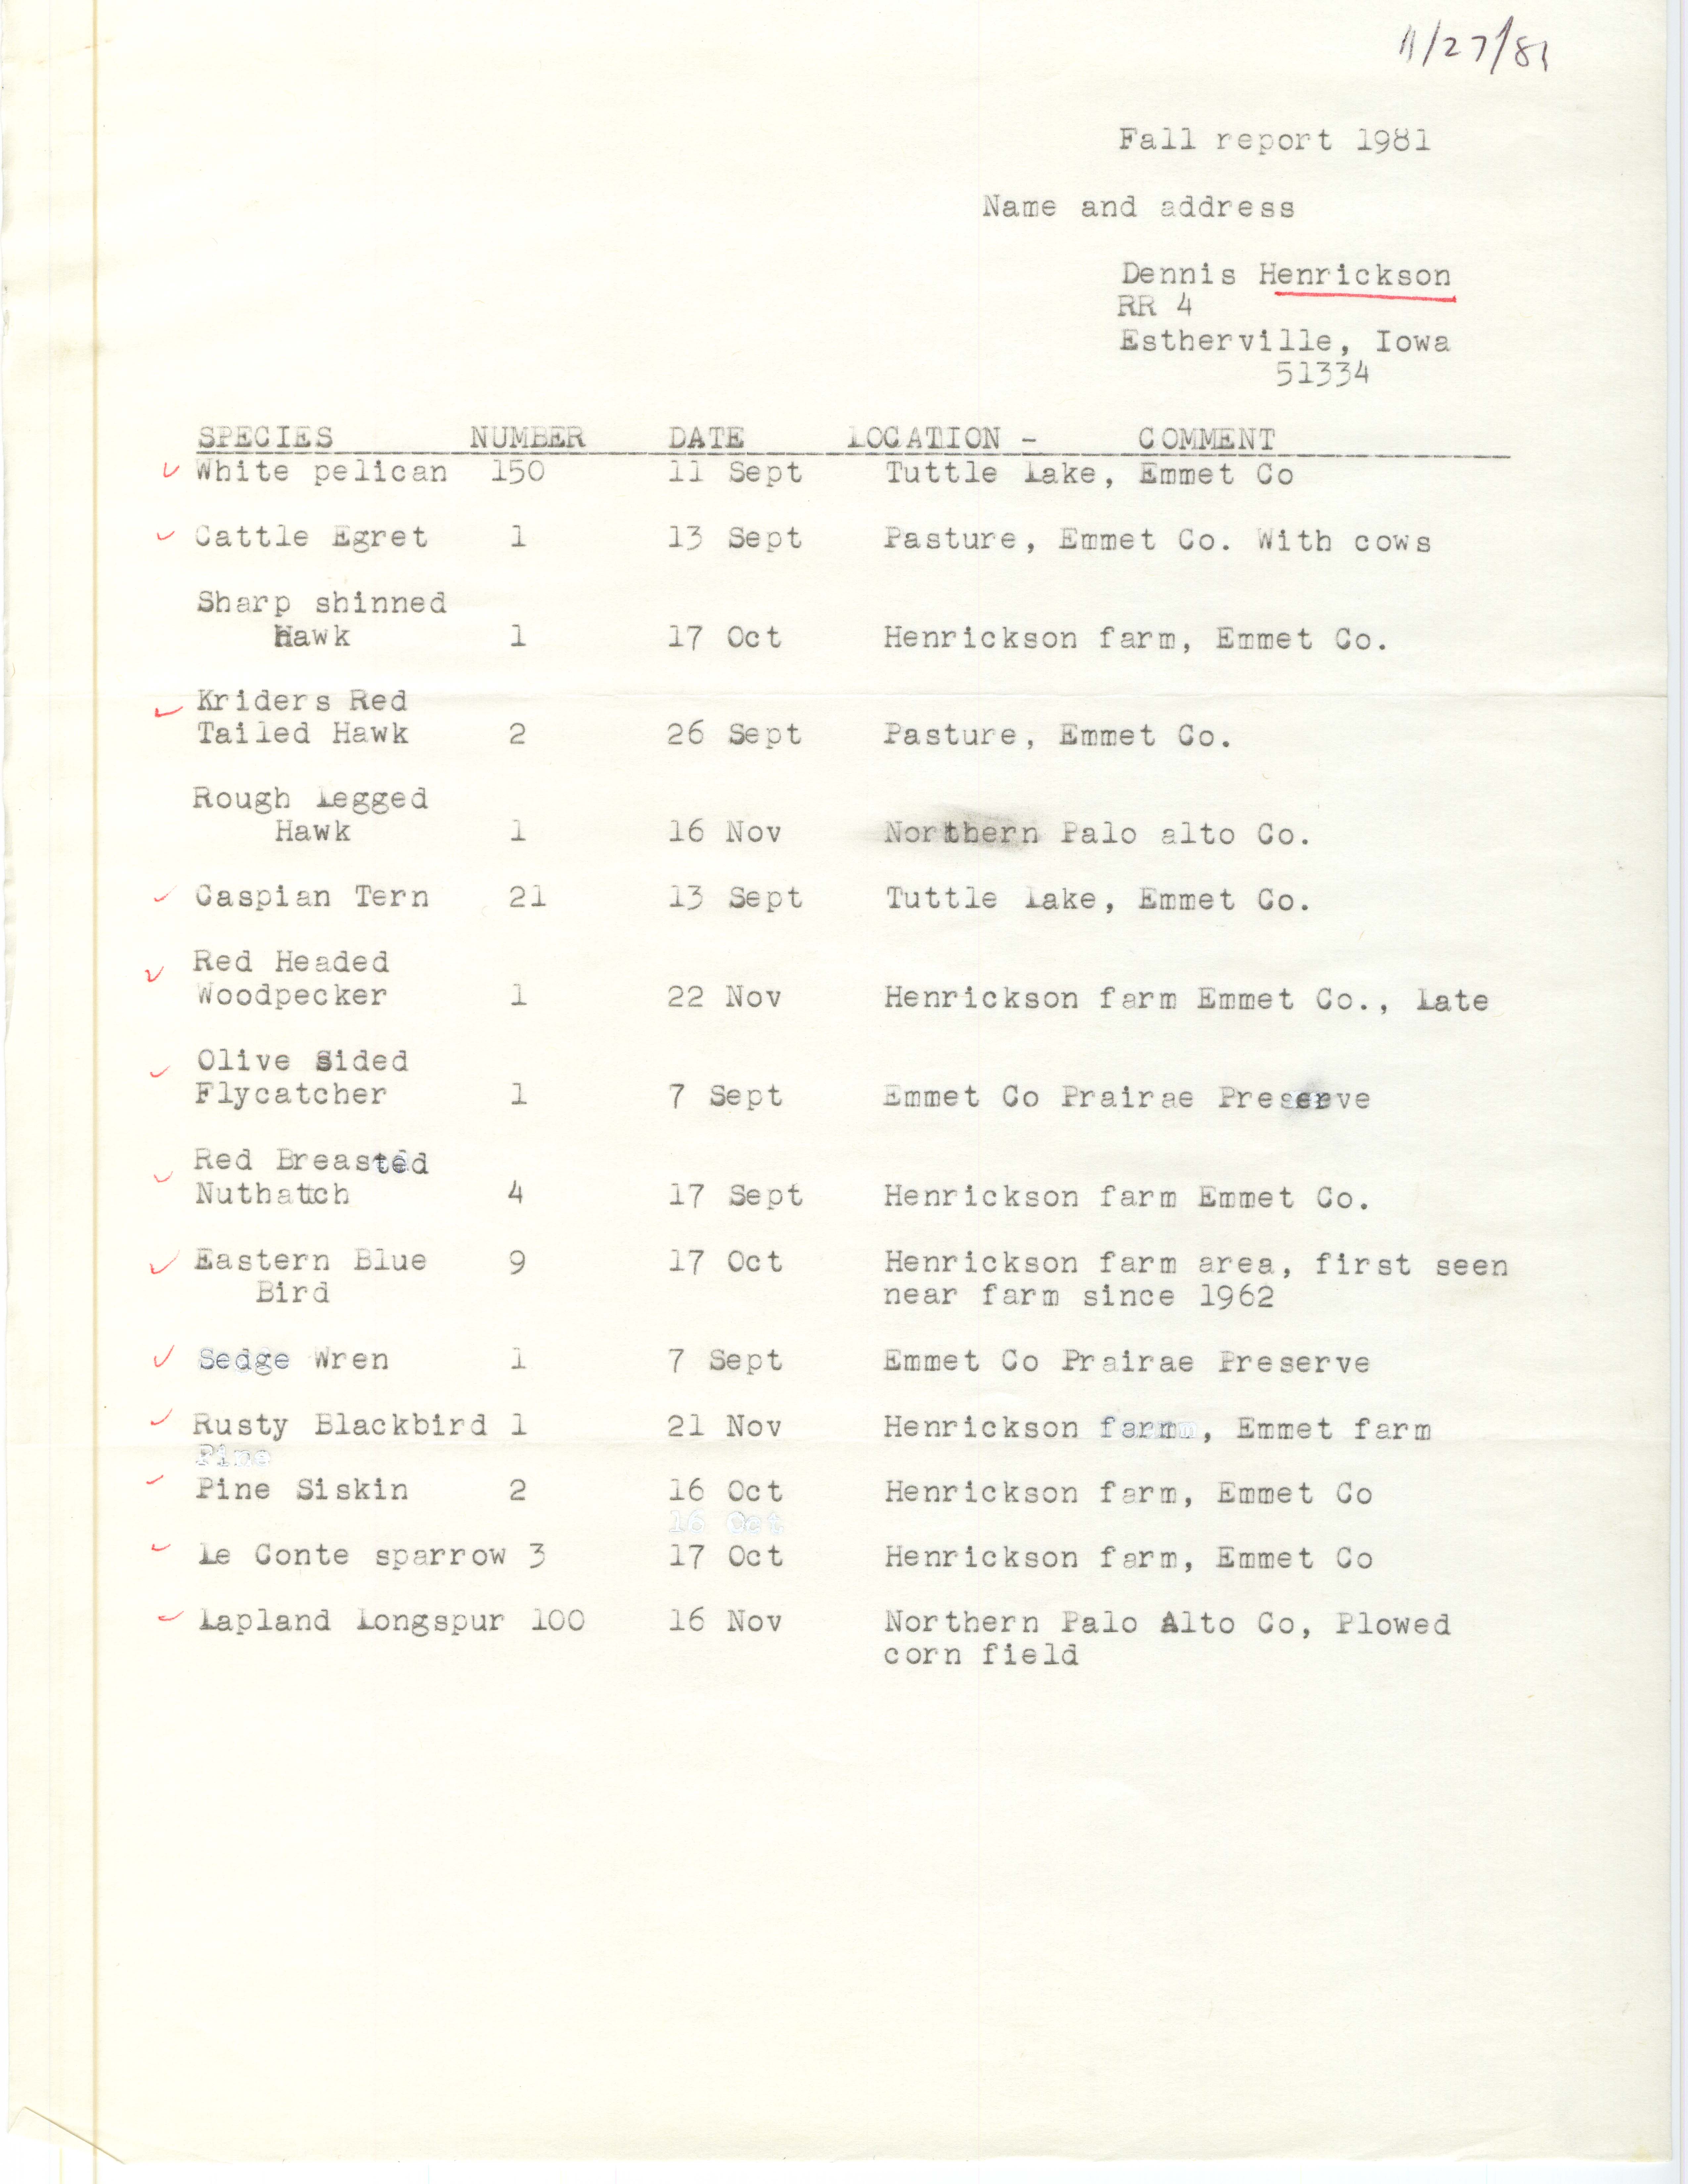 Field notes contributed by Dennis Henrickson, November 27, 1981